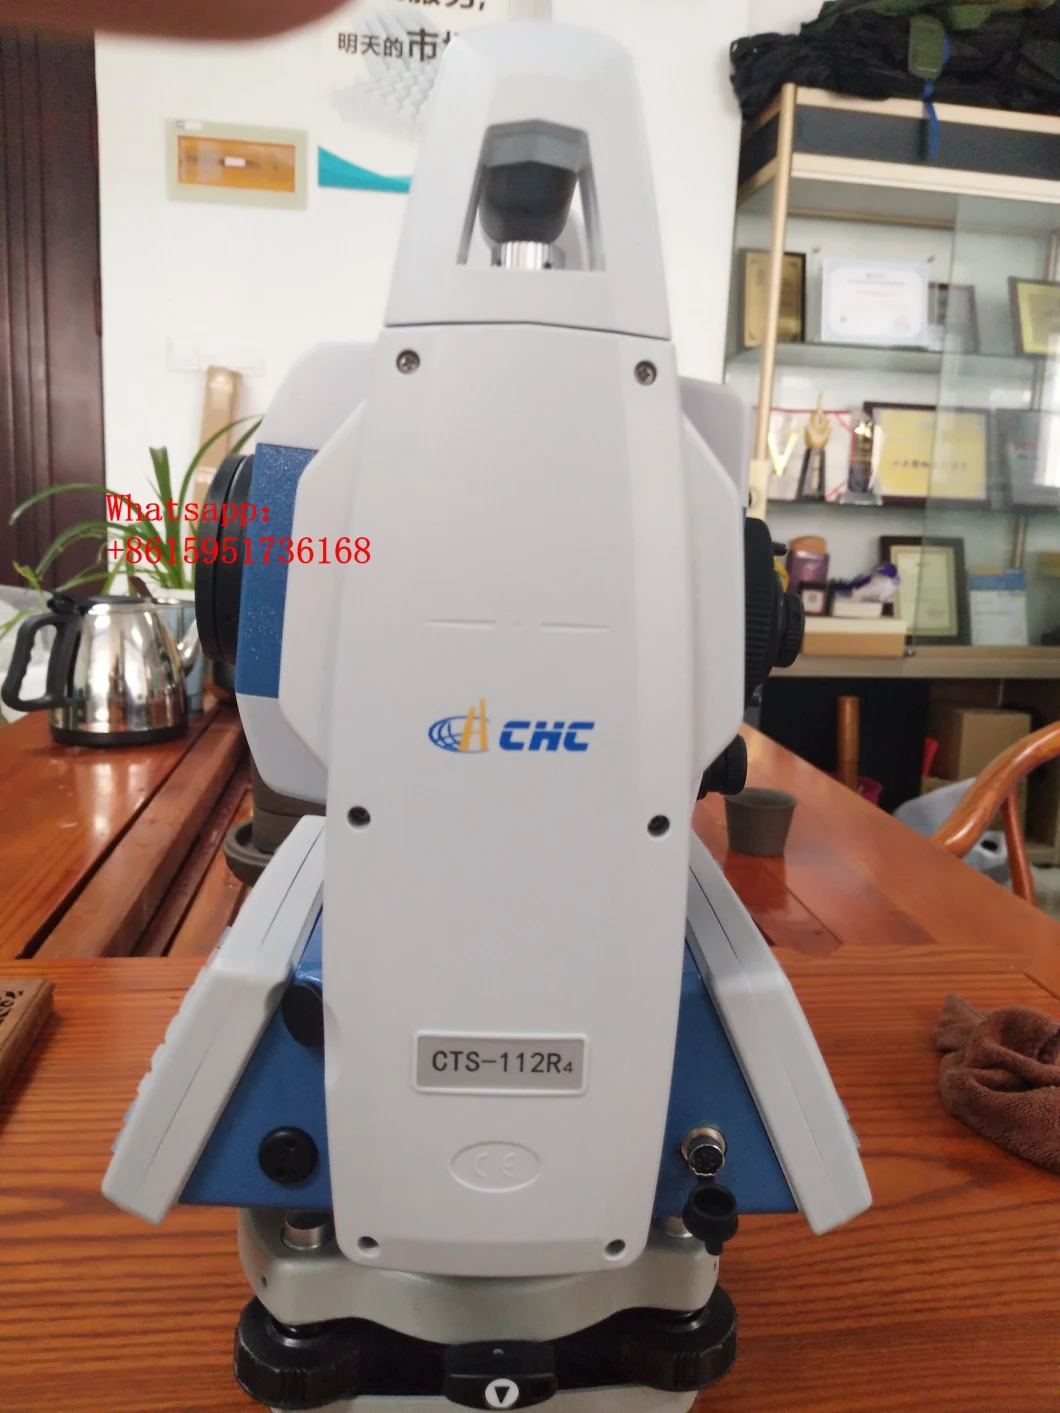 Chc Total Station for Land Survey Construction Work (CTS-112R4)